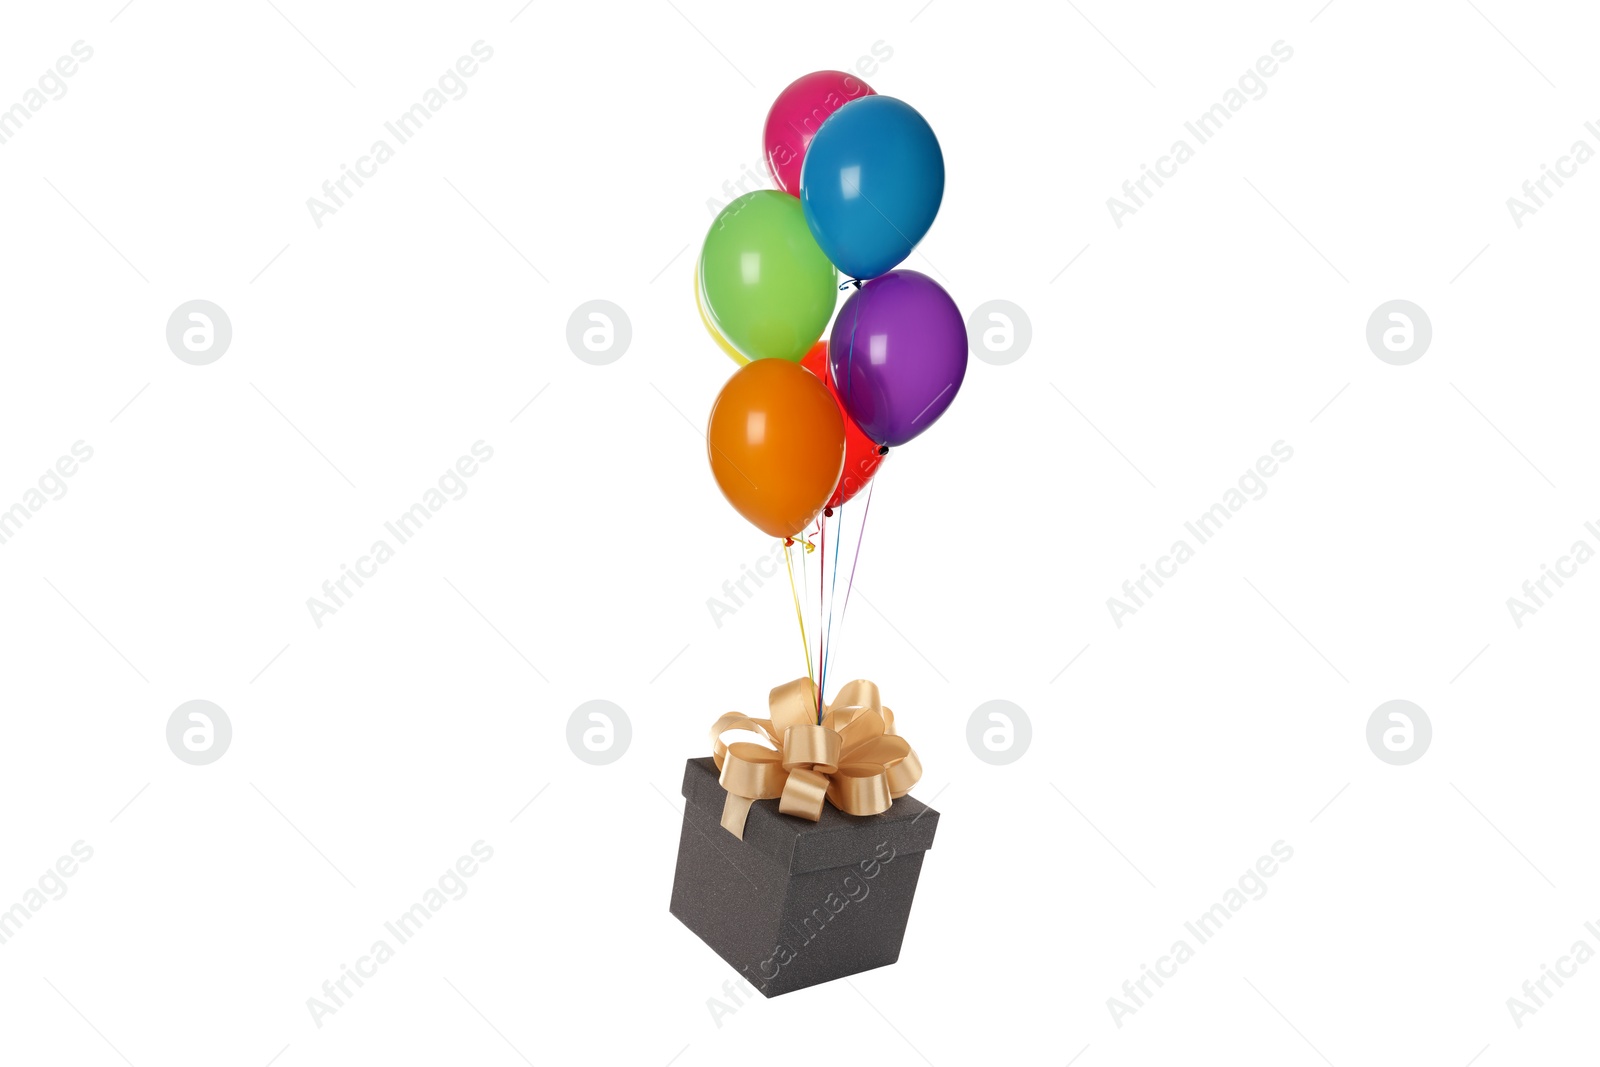 Image of Many balloons tied to gift box on white background